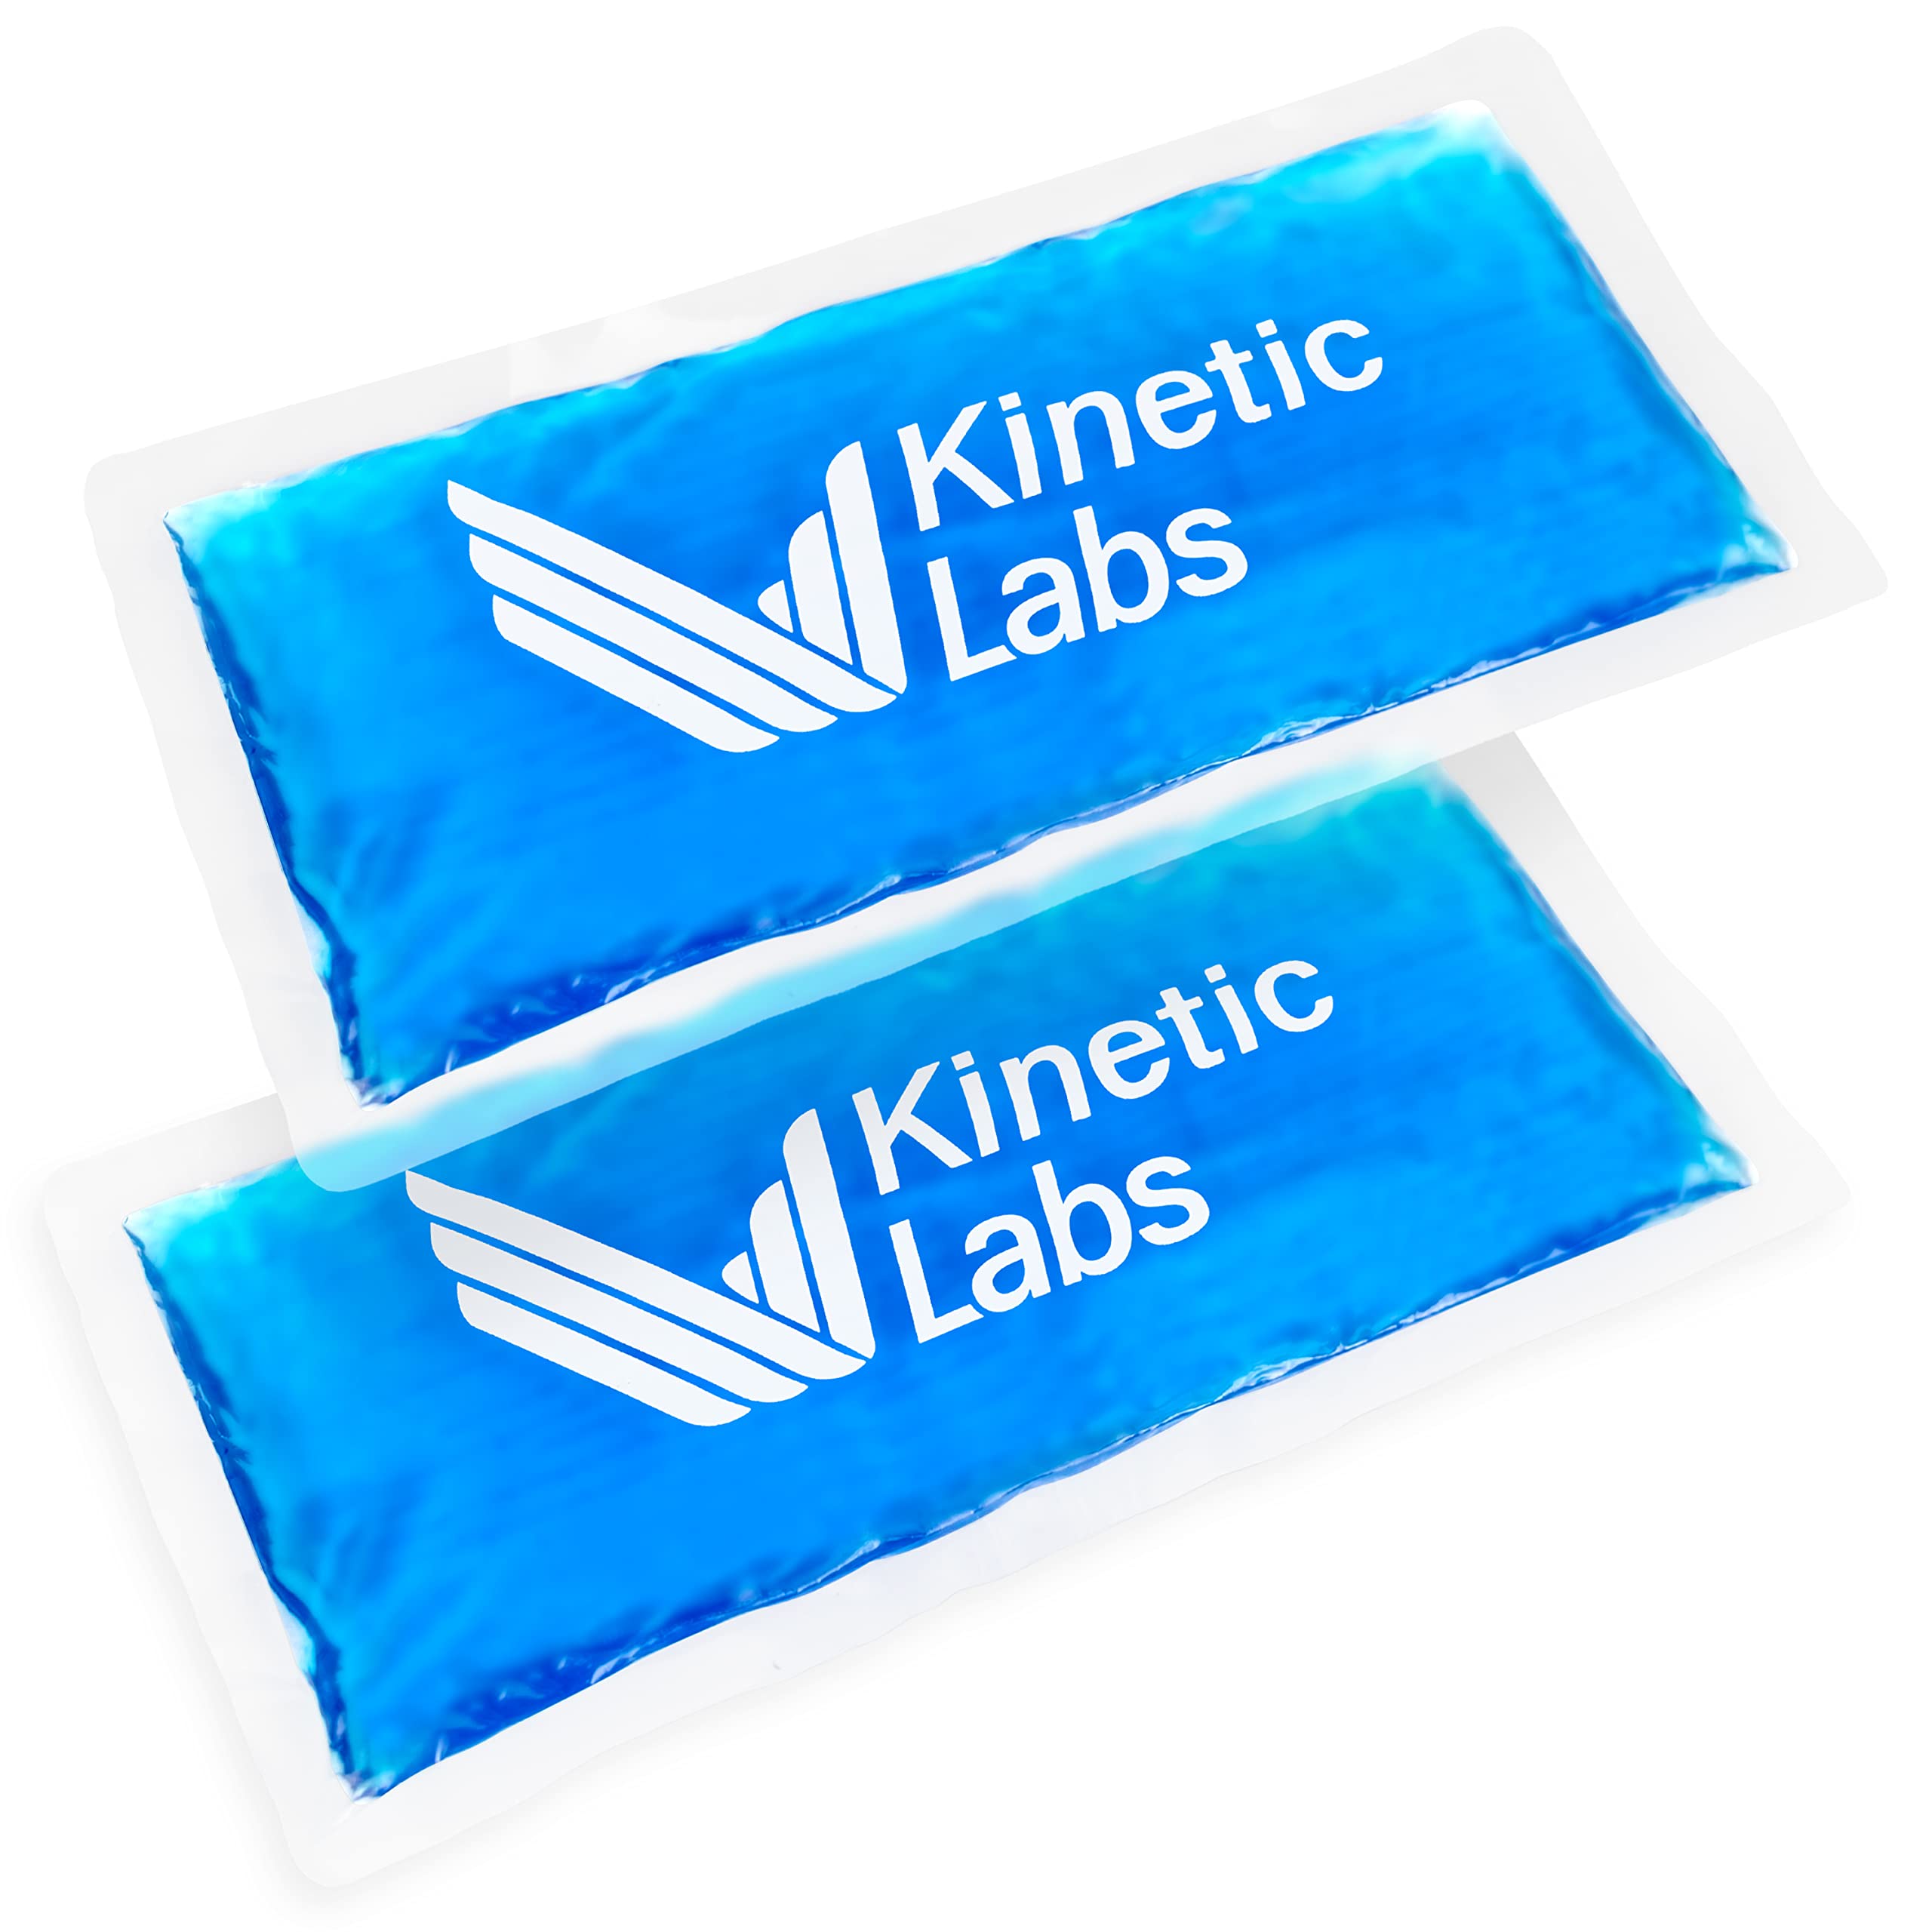 Reusable Ice Packs for Injuries (2 Pack) Kinetic Labs Gel Ice Packs 9.5 x  4.5 - Flexible Soft Ice Packs for Knee Shoulder Head Neck Ankle Wrist  Elbow Arm Foot Headaches Surgery (